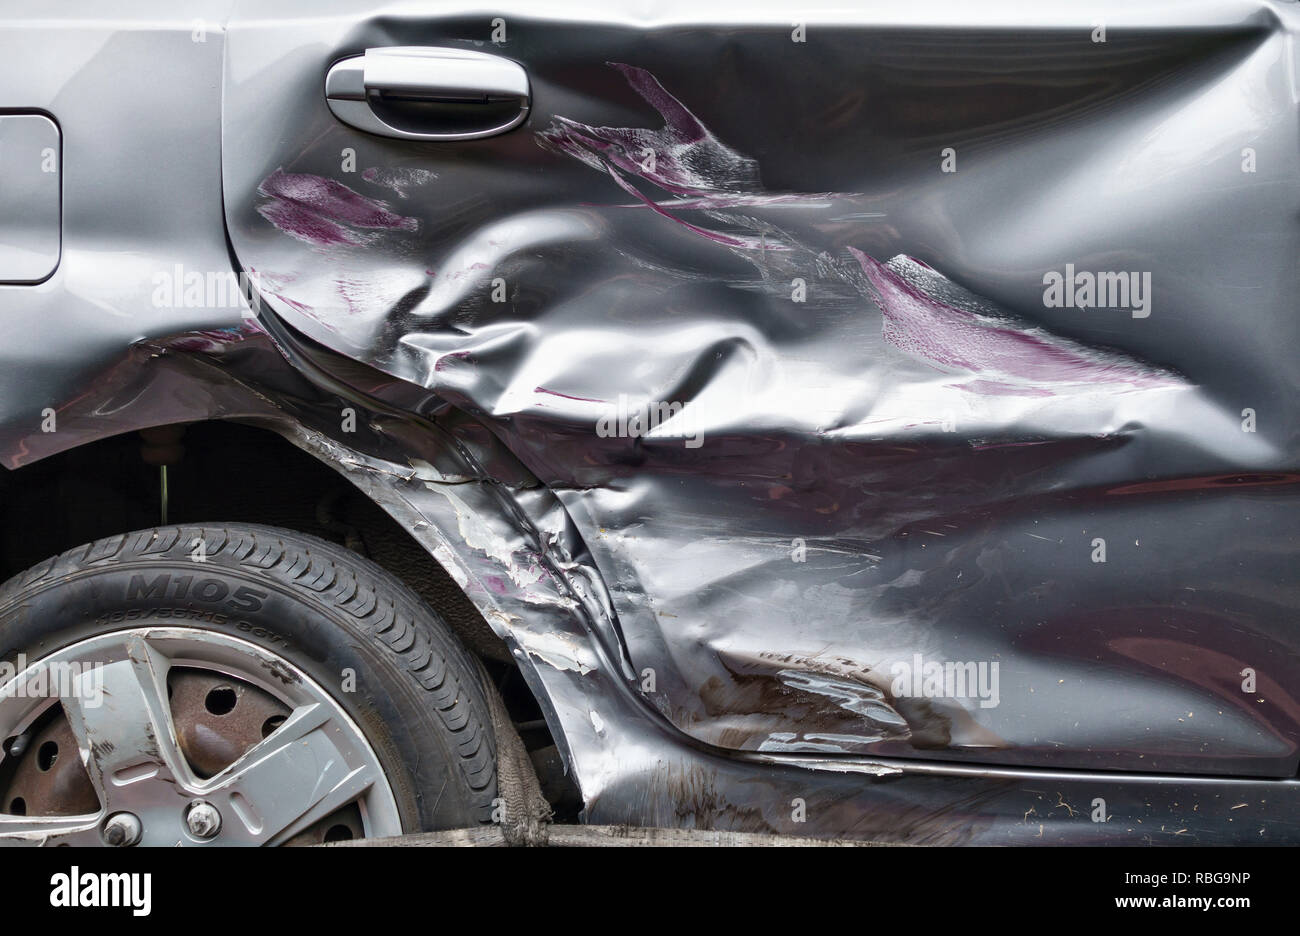 UK. Close up of a car door, badly damaged in a collision with another vehicle Stock Photo